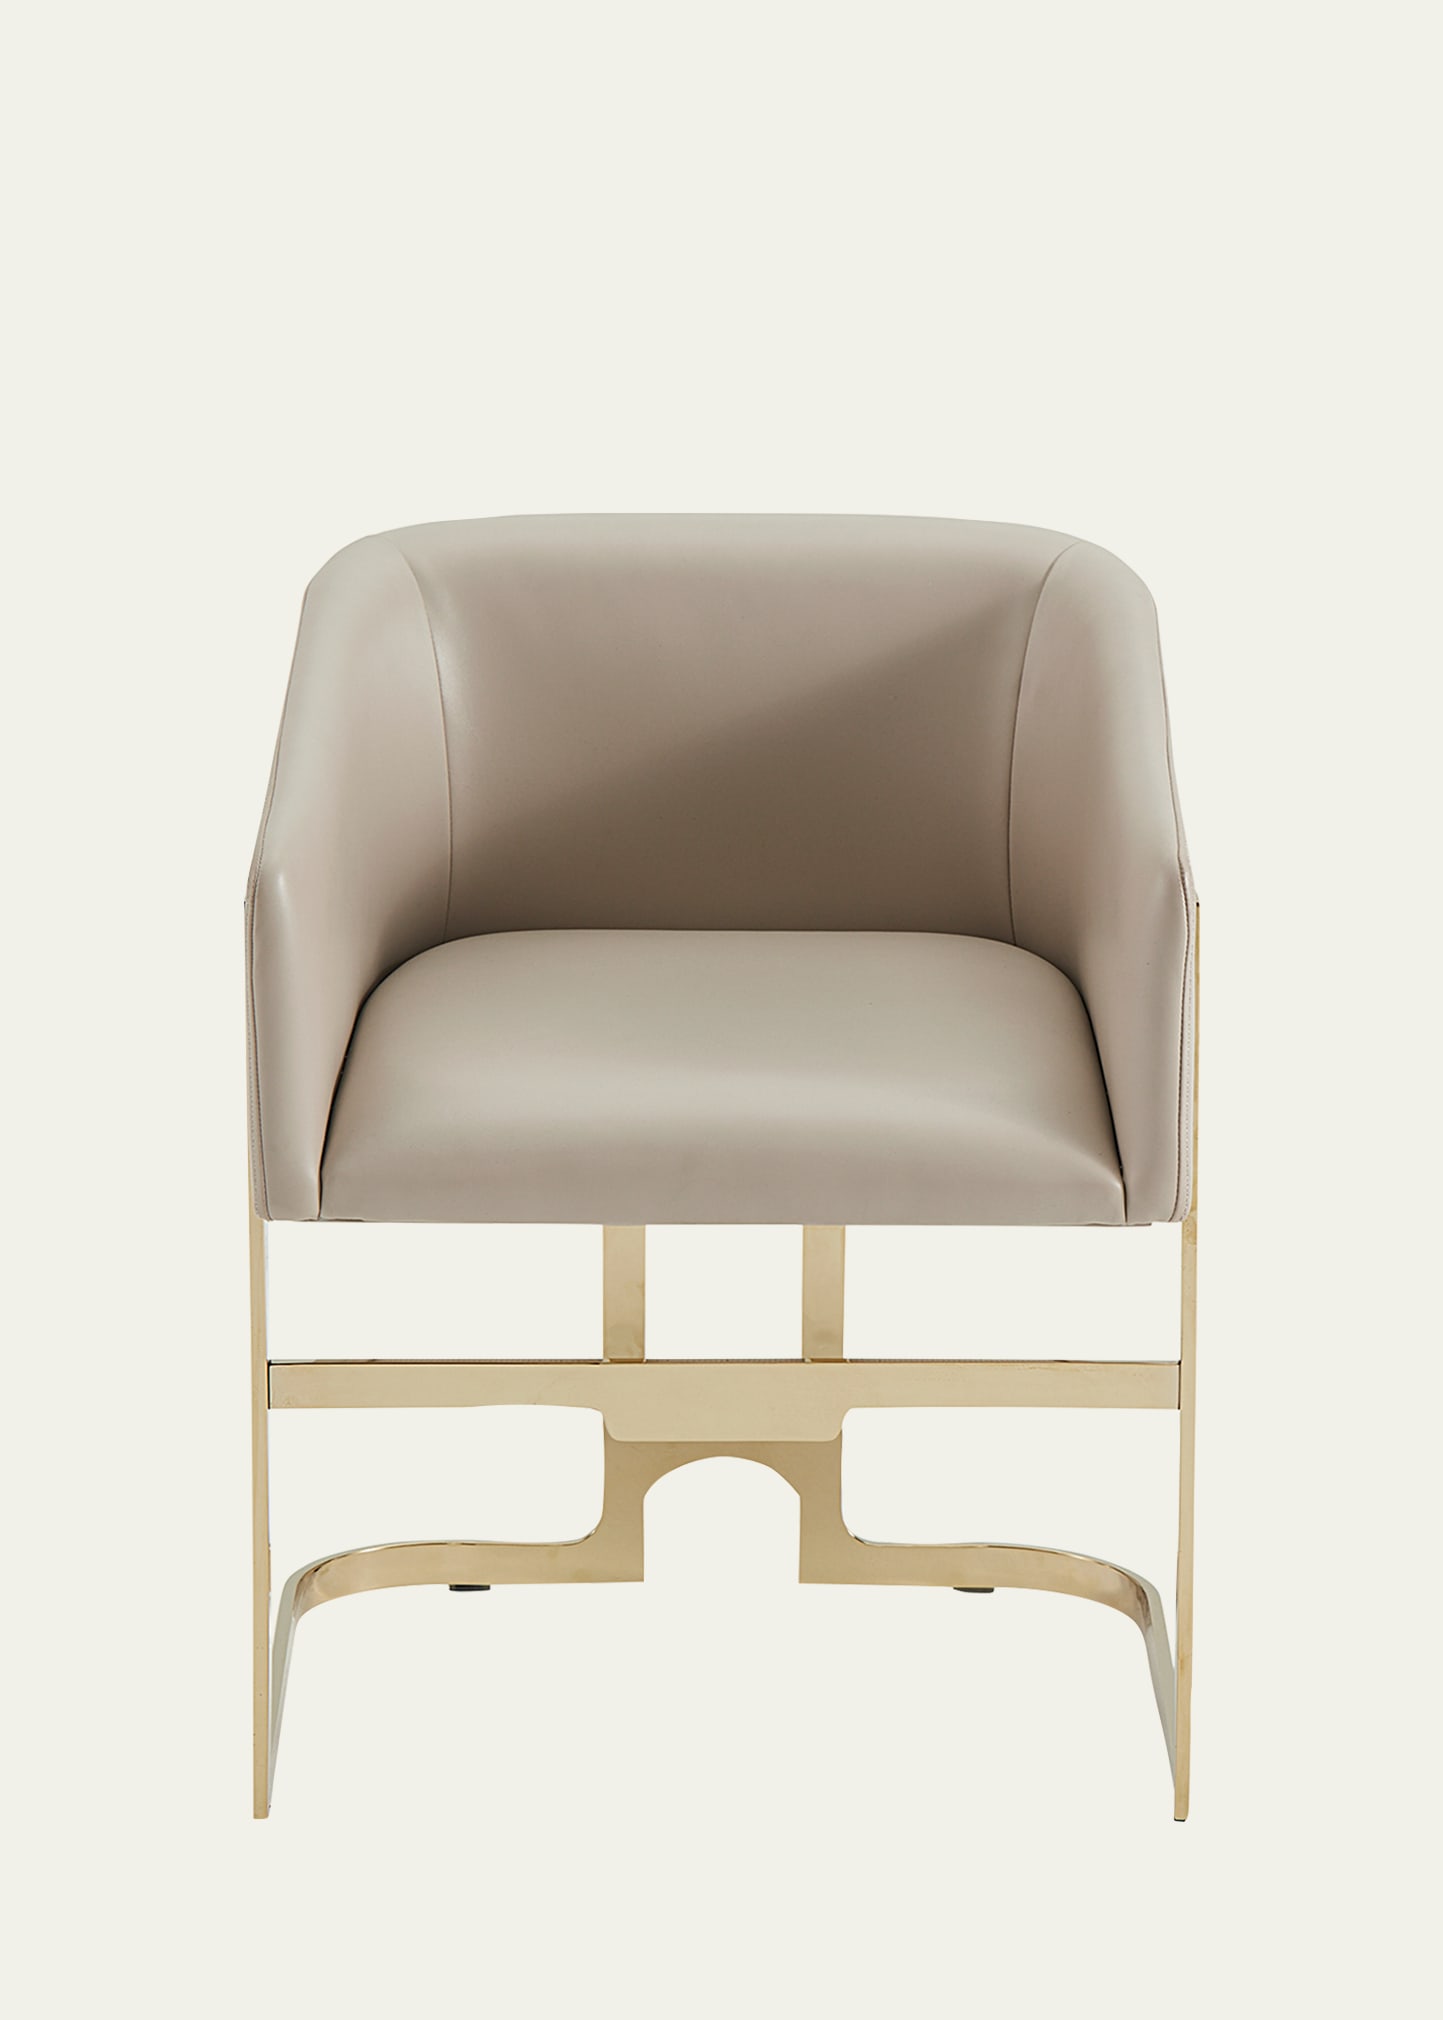 Interlude Home Banks Chair In Neutral